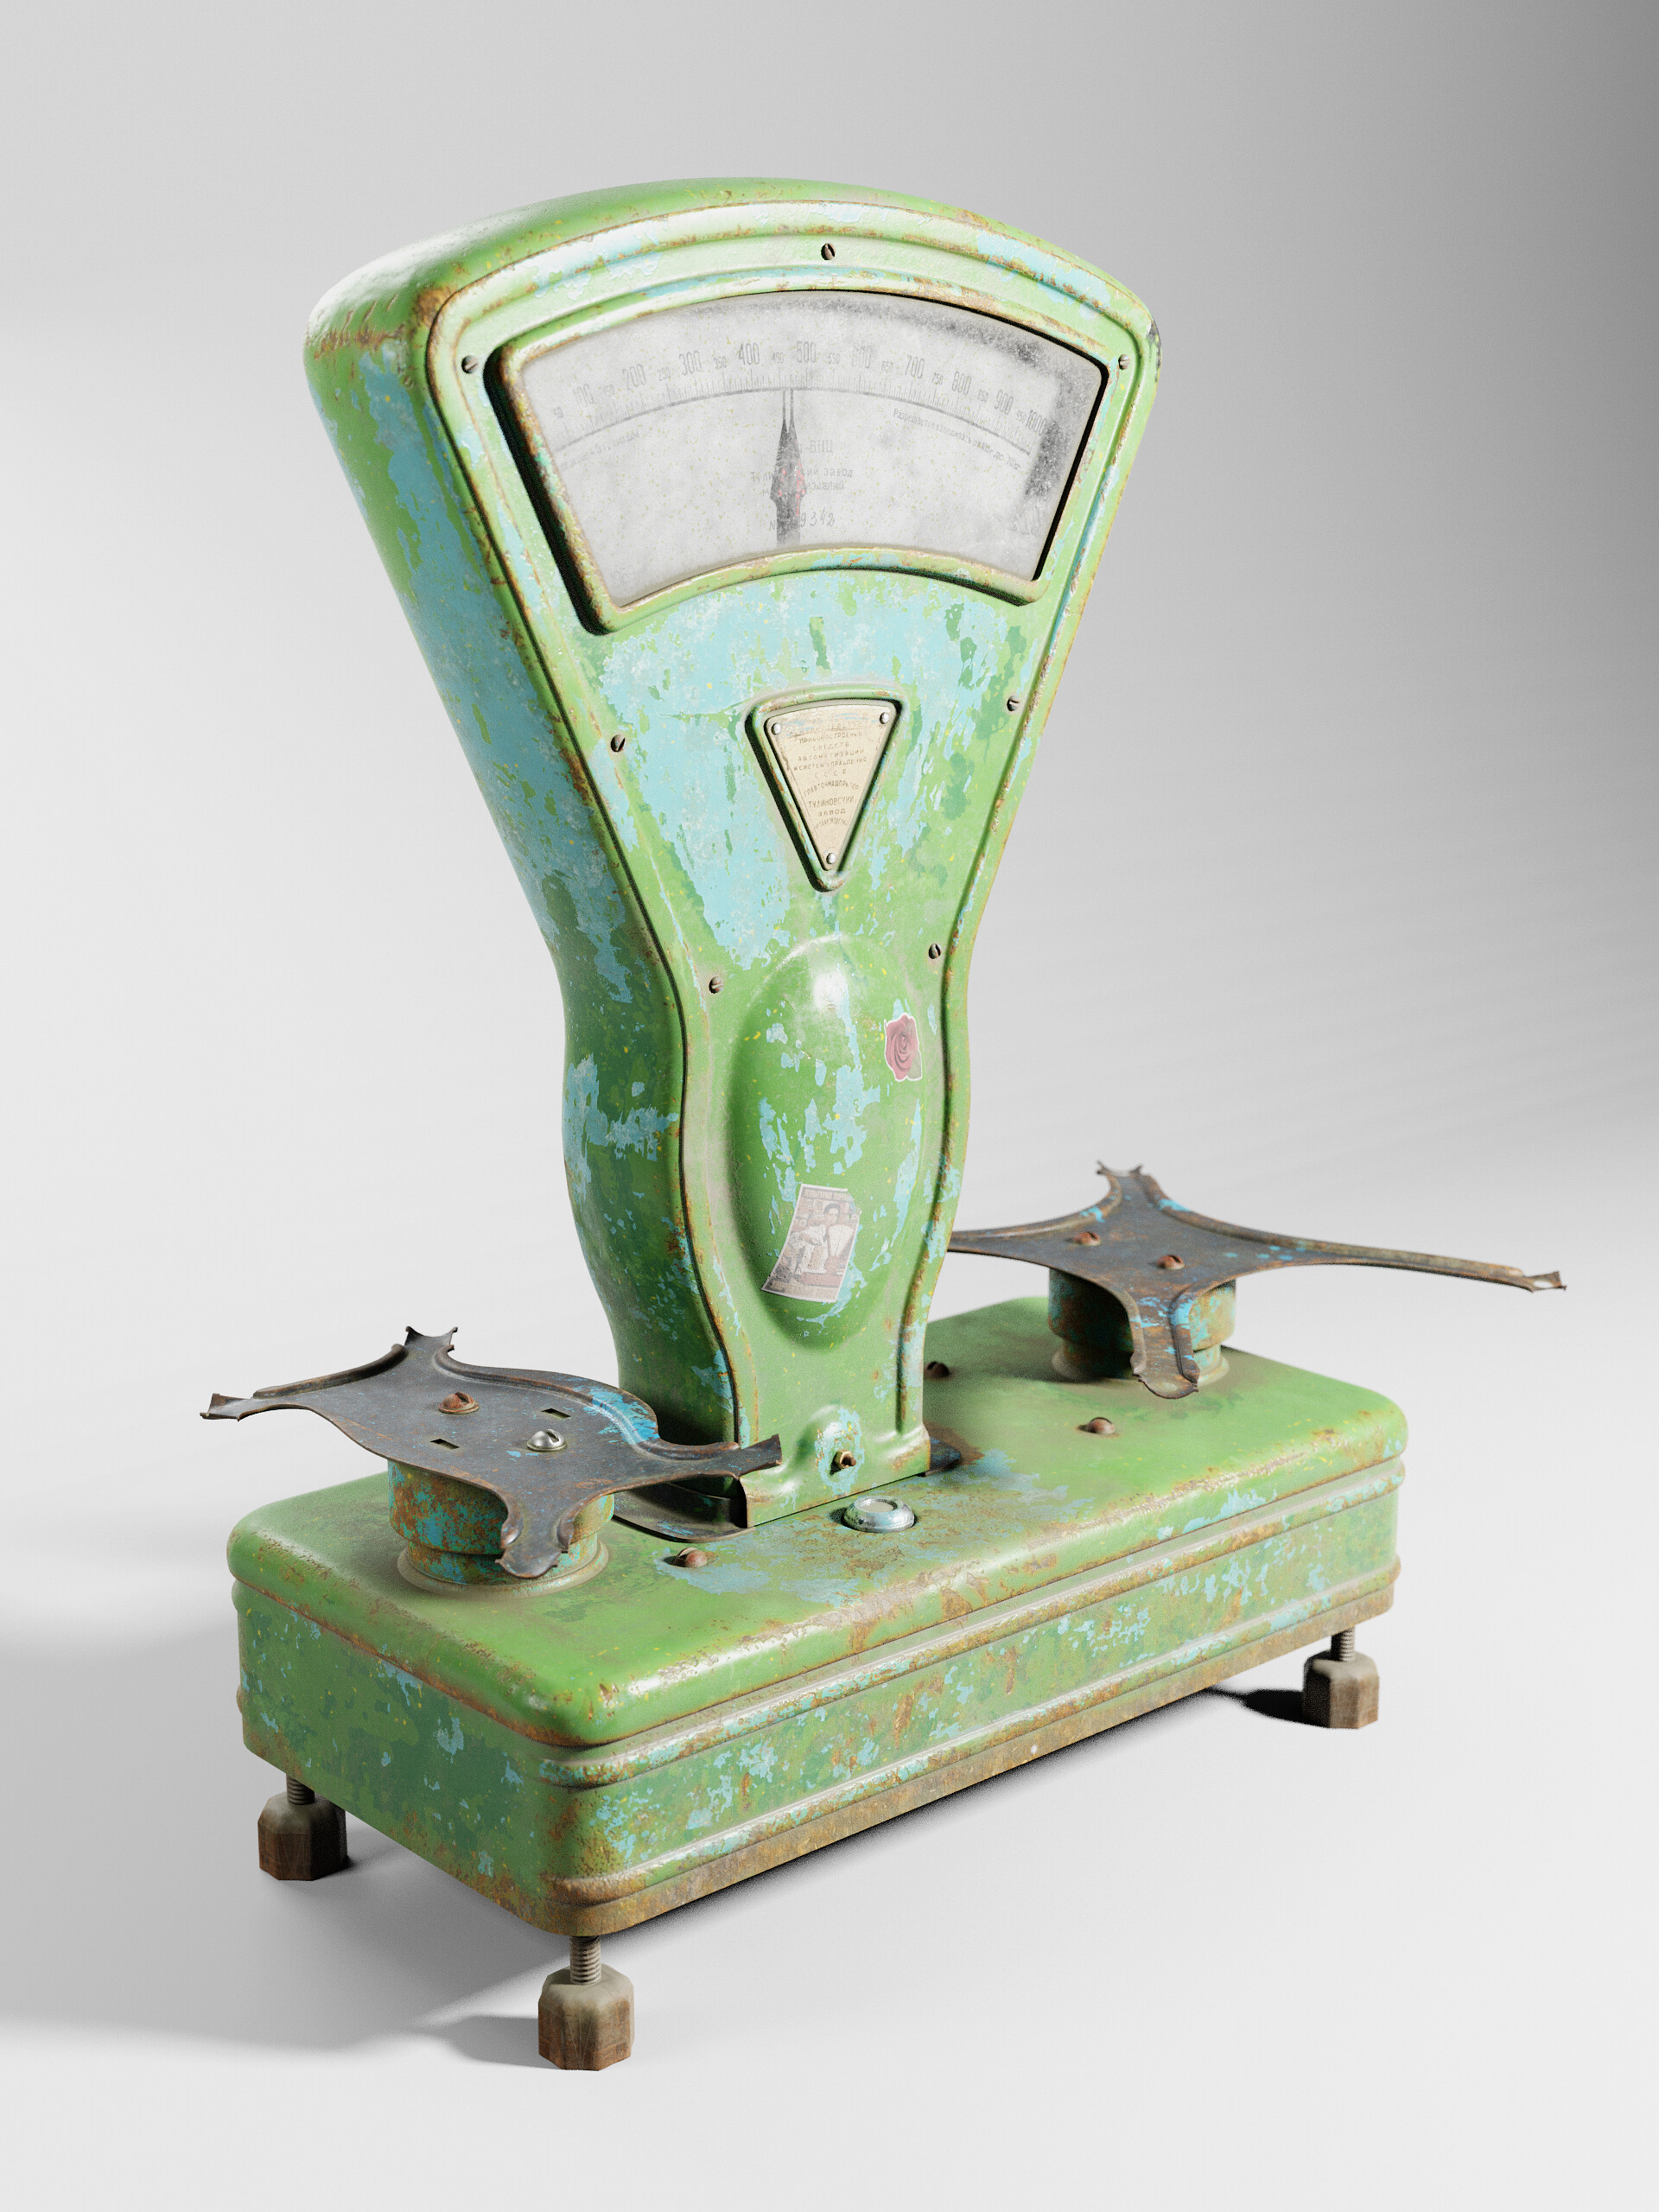 Manual Scales Of Soviet Period Of The Small Size, For Weighing Of